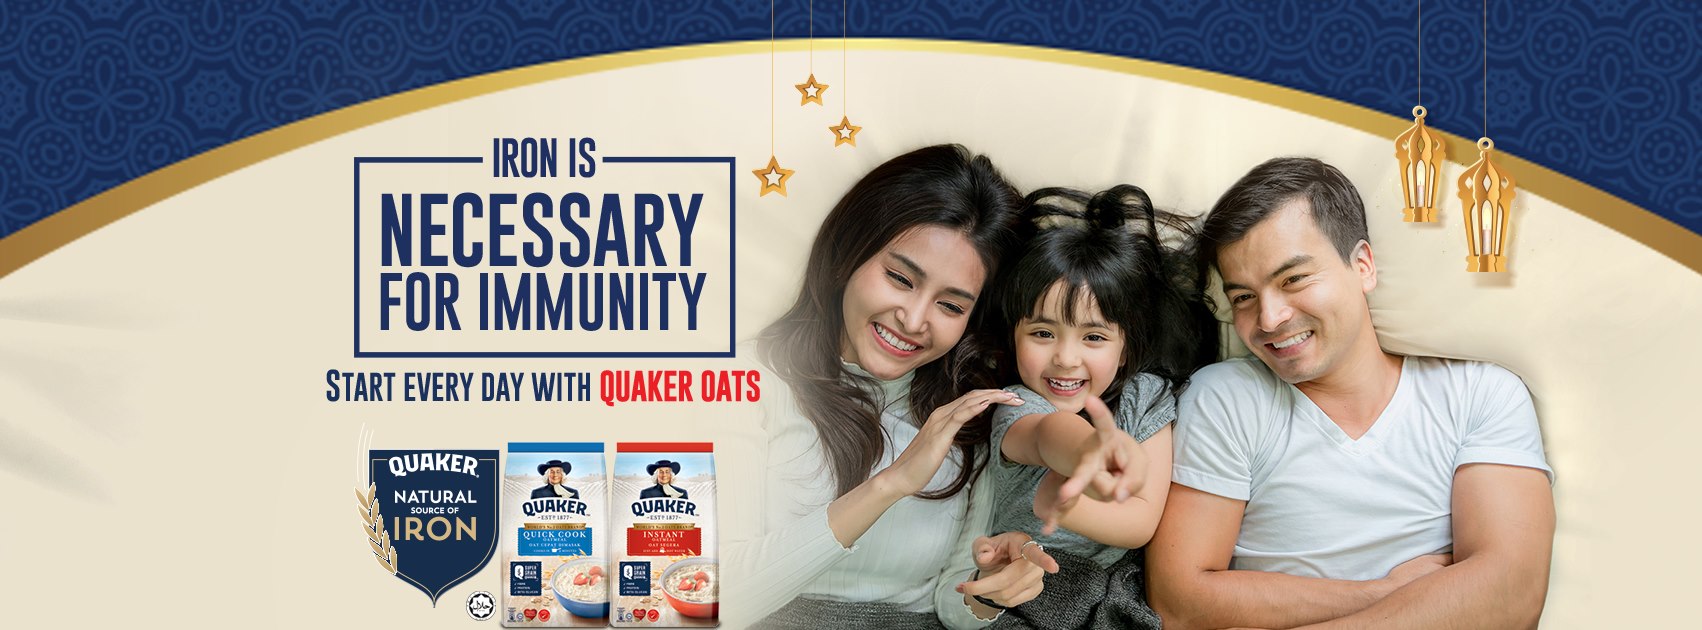 Image from Quaker Malaysia / Facebook